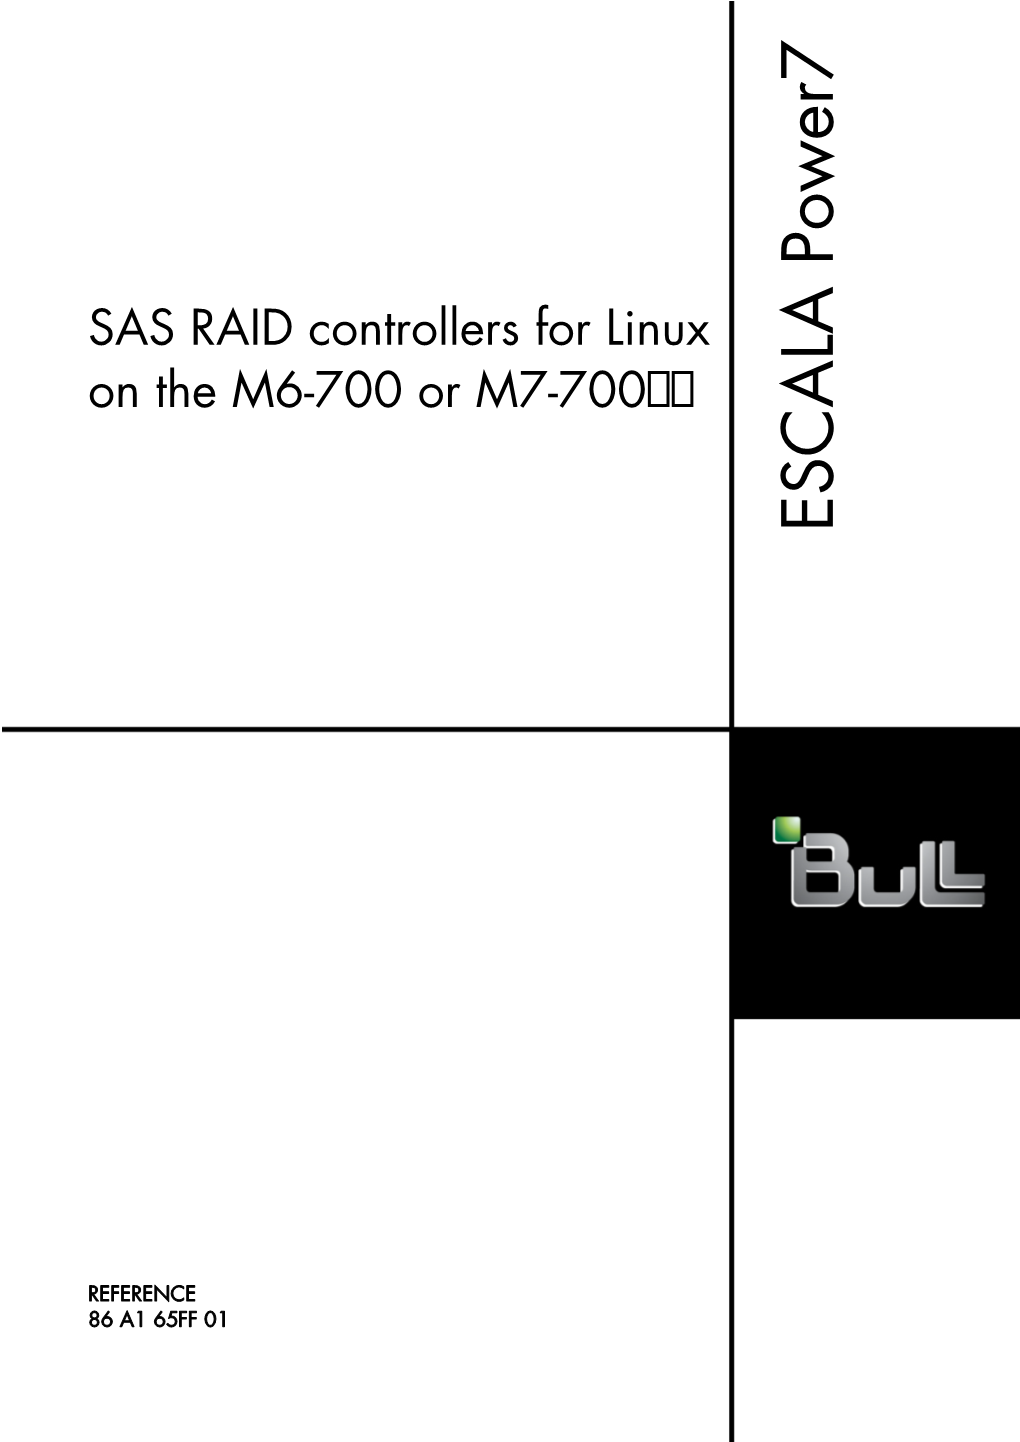 SAS RAID Controllers for Linux on the M6-700 Or M7-700